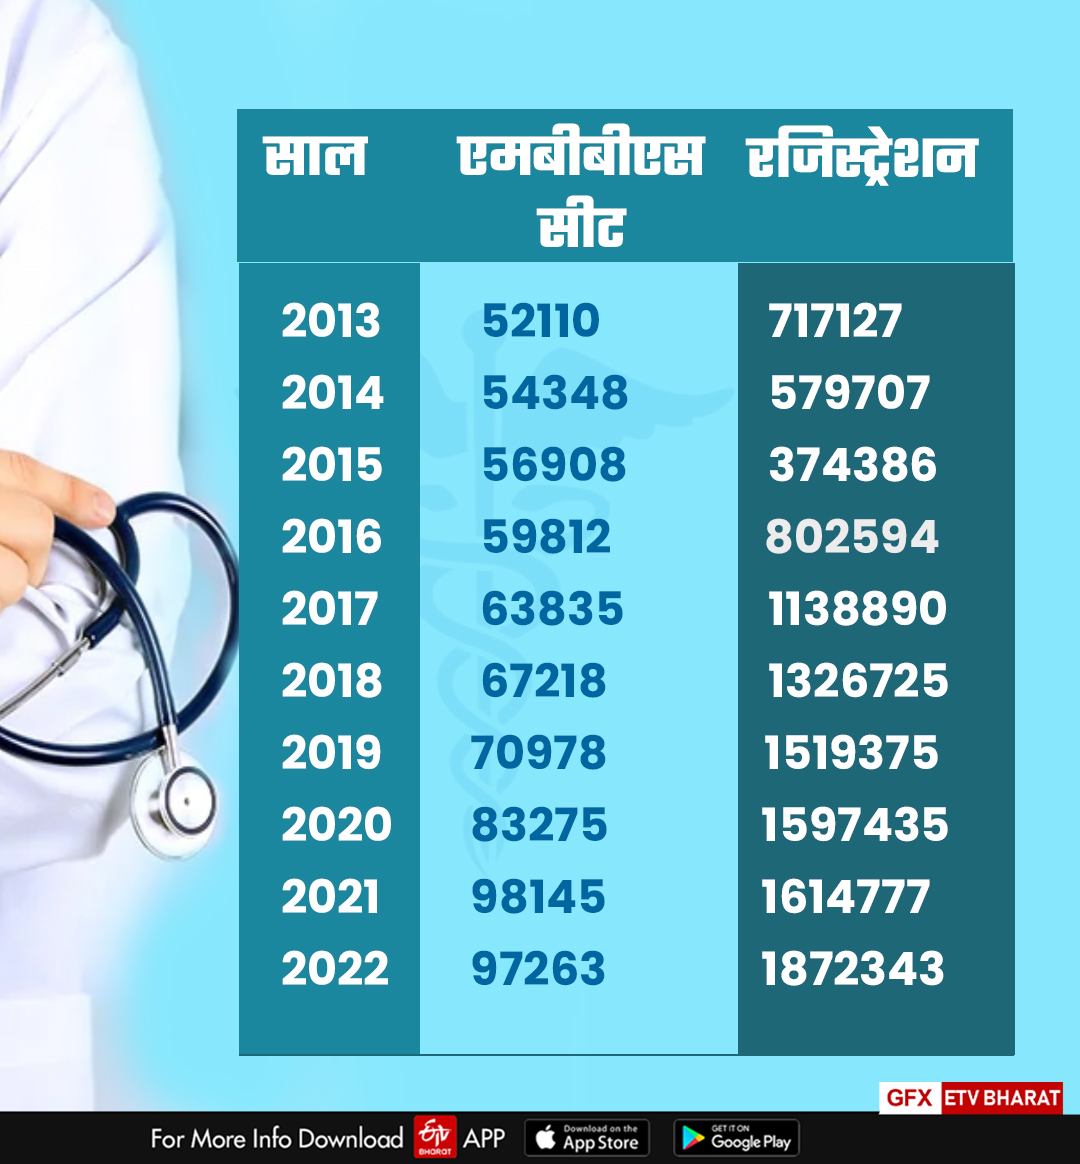 Competition increased with double MBBS seats